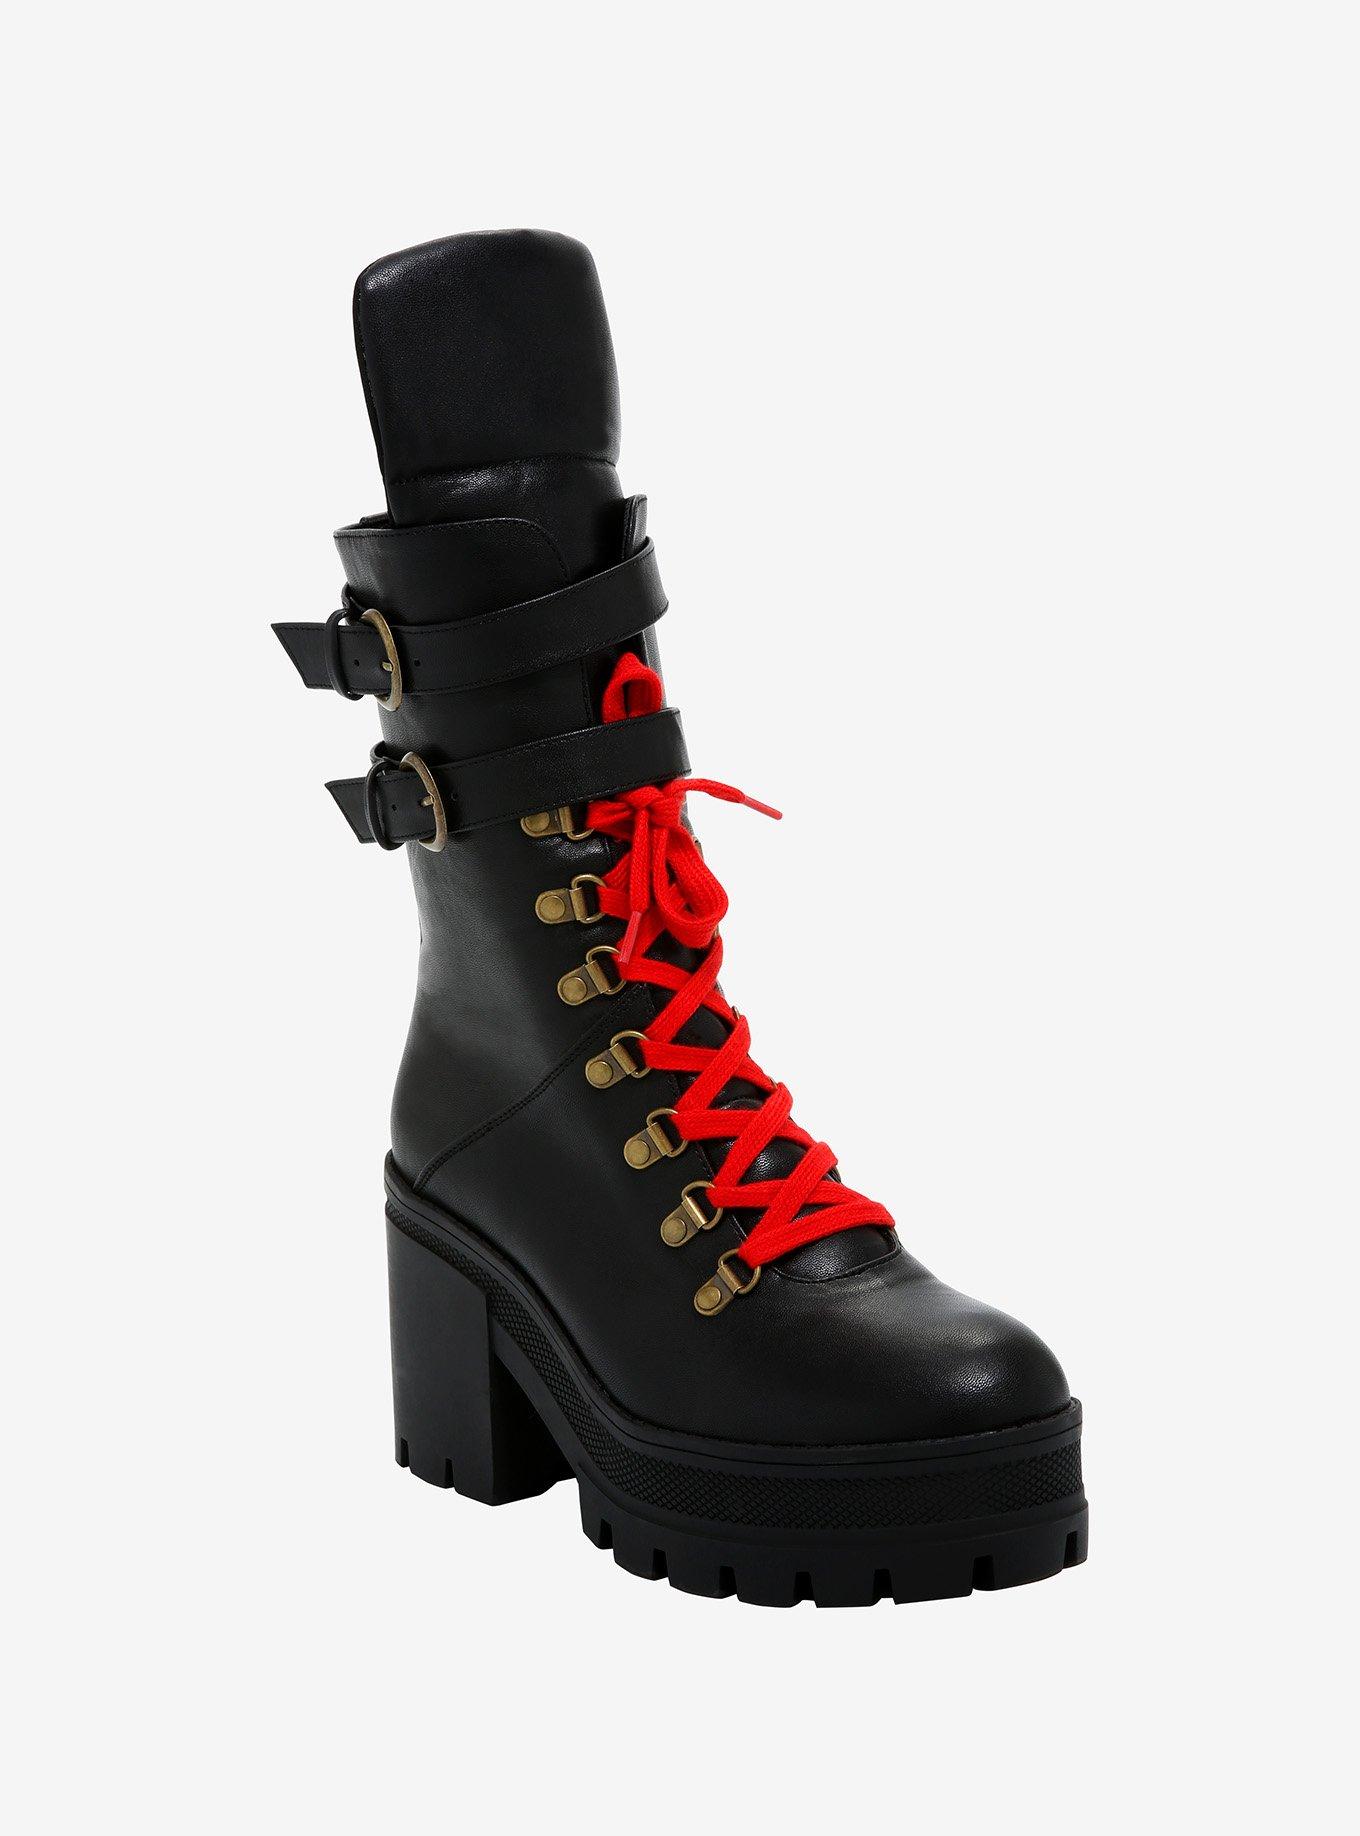 Harley Quinn Suicide Squad Shoes | lupon.gov.ph